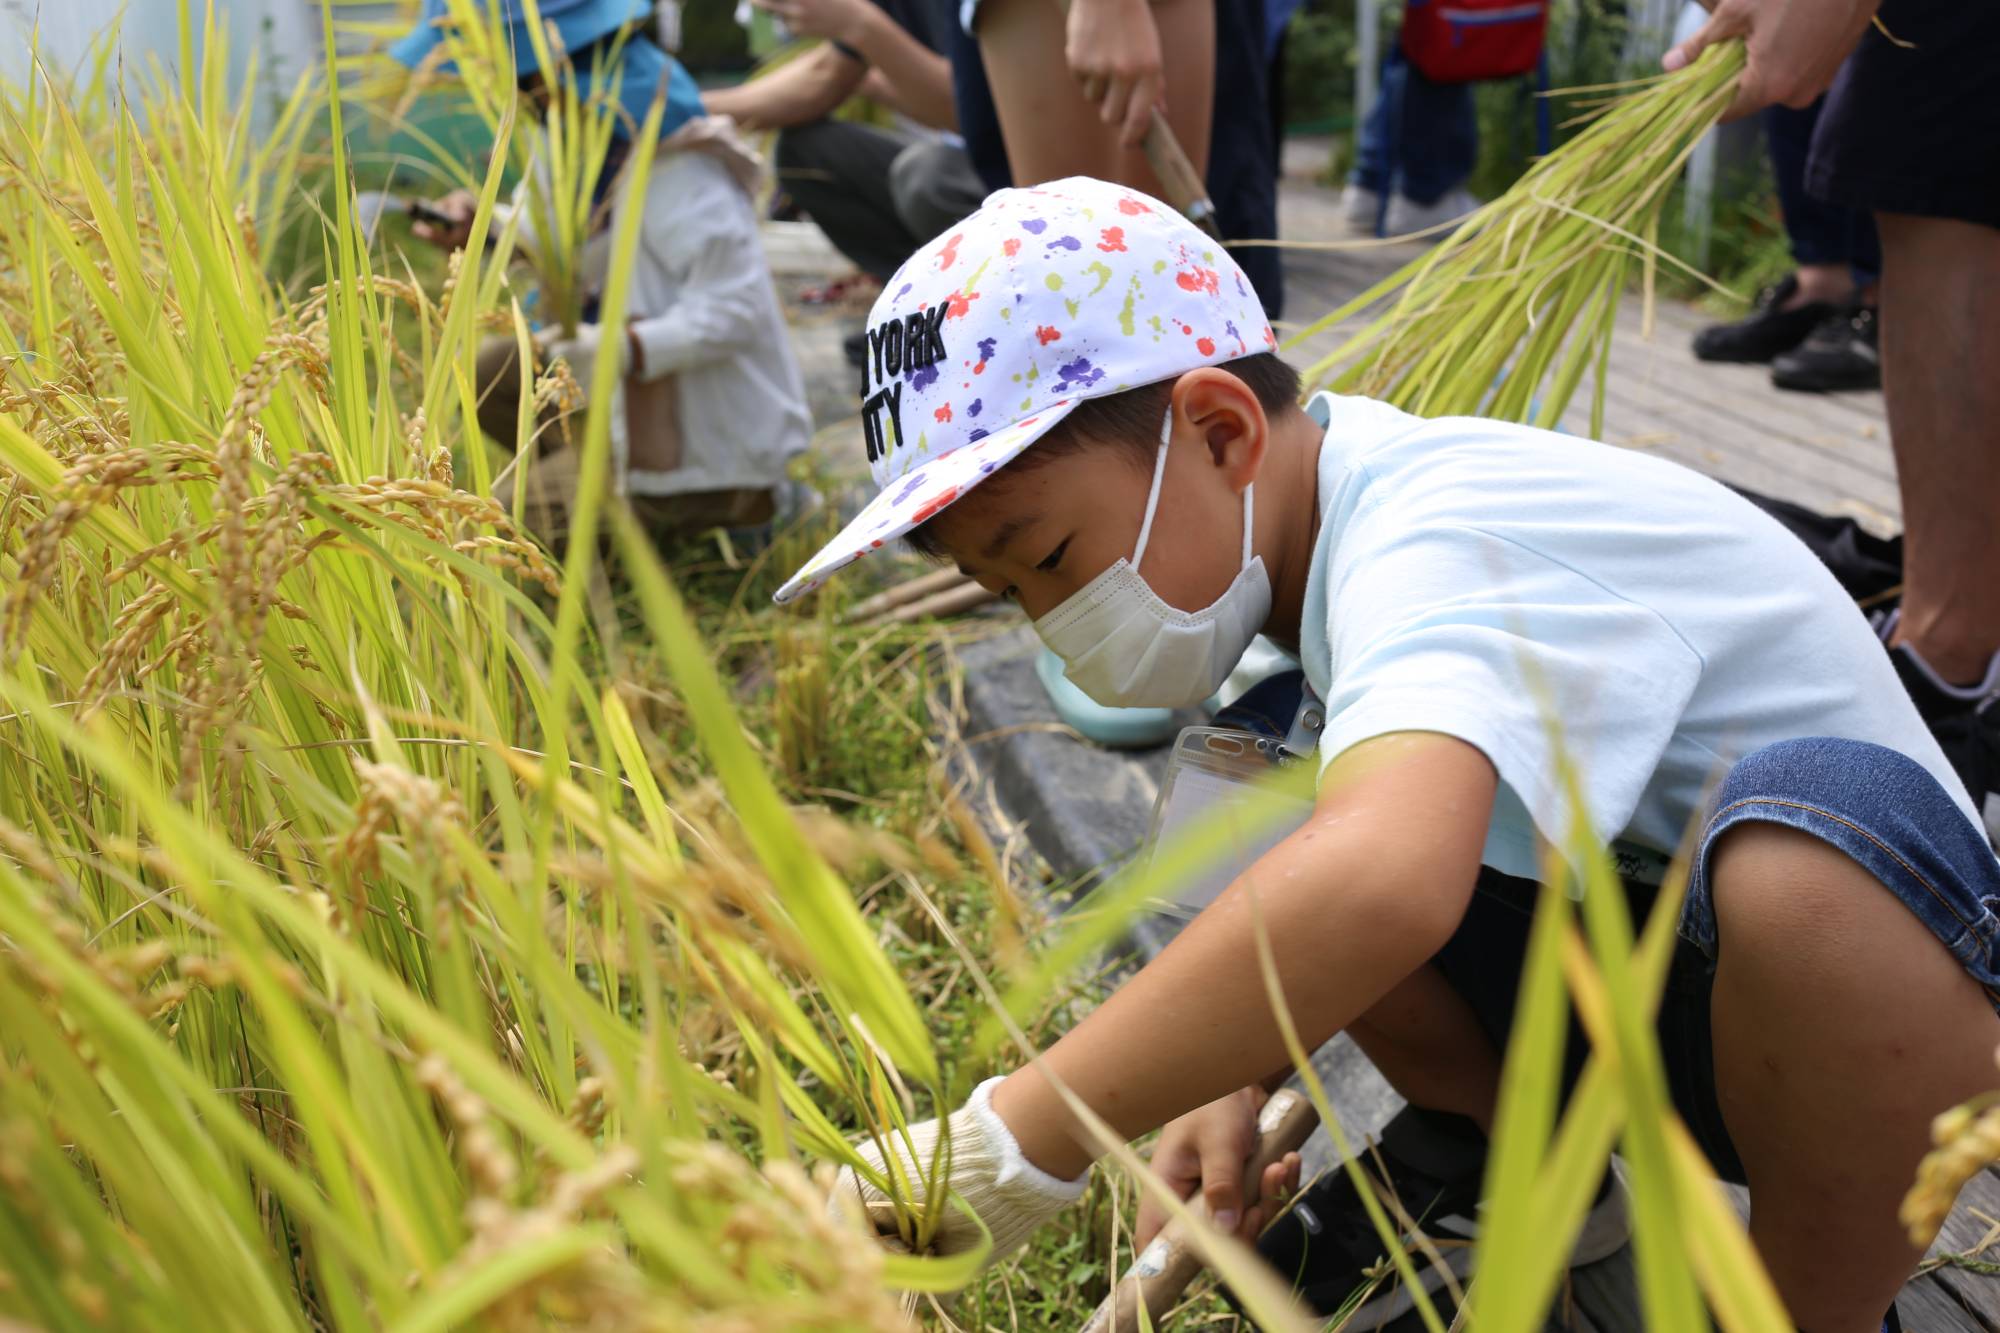 A boy harvests rice on the roof of the Miyako Ecology Center in Kyoto. | COURTESY OF THE MIYAKO ECOLOGY CENTER